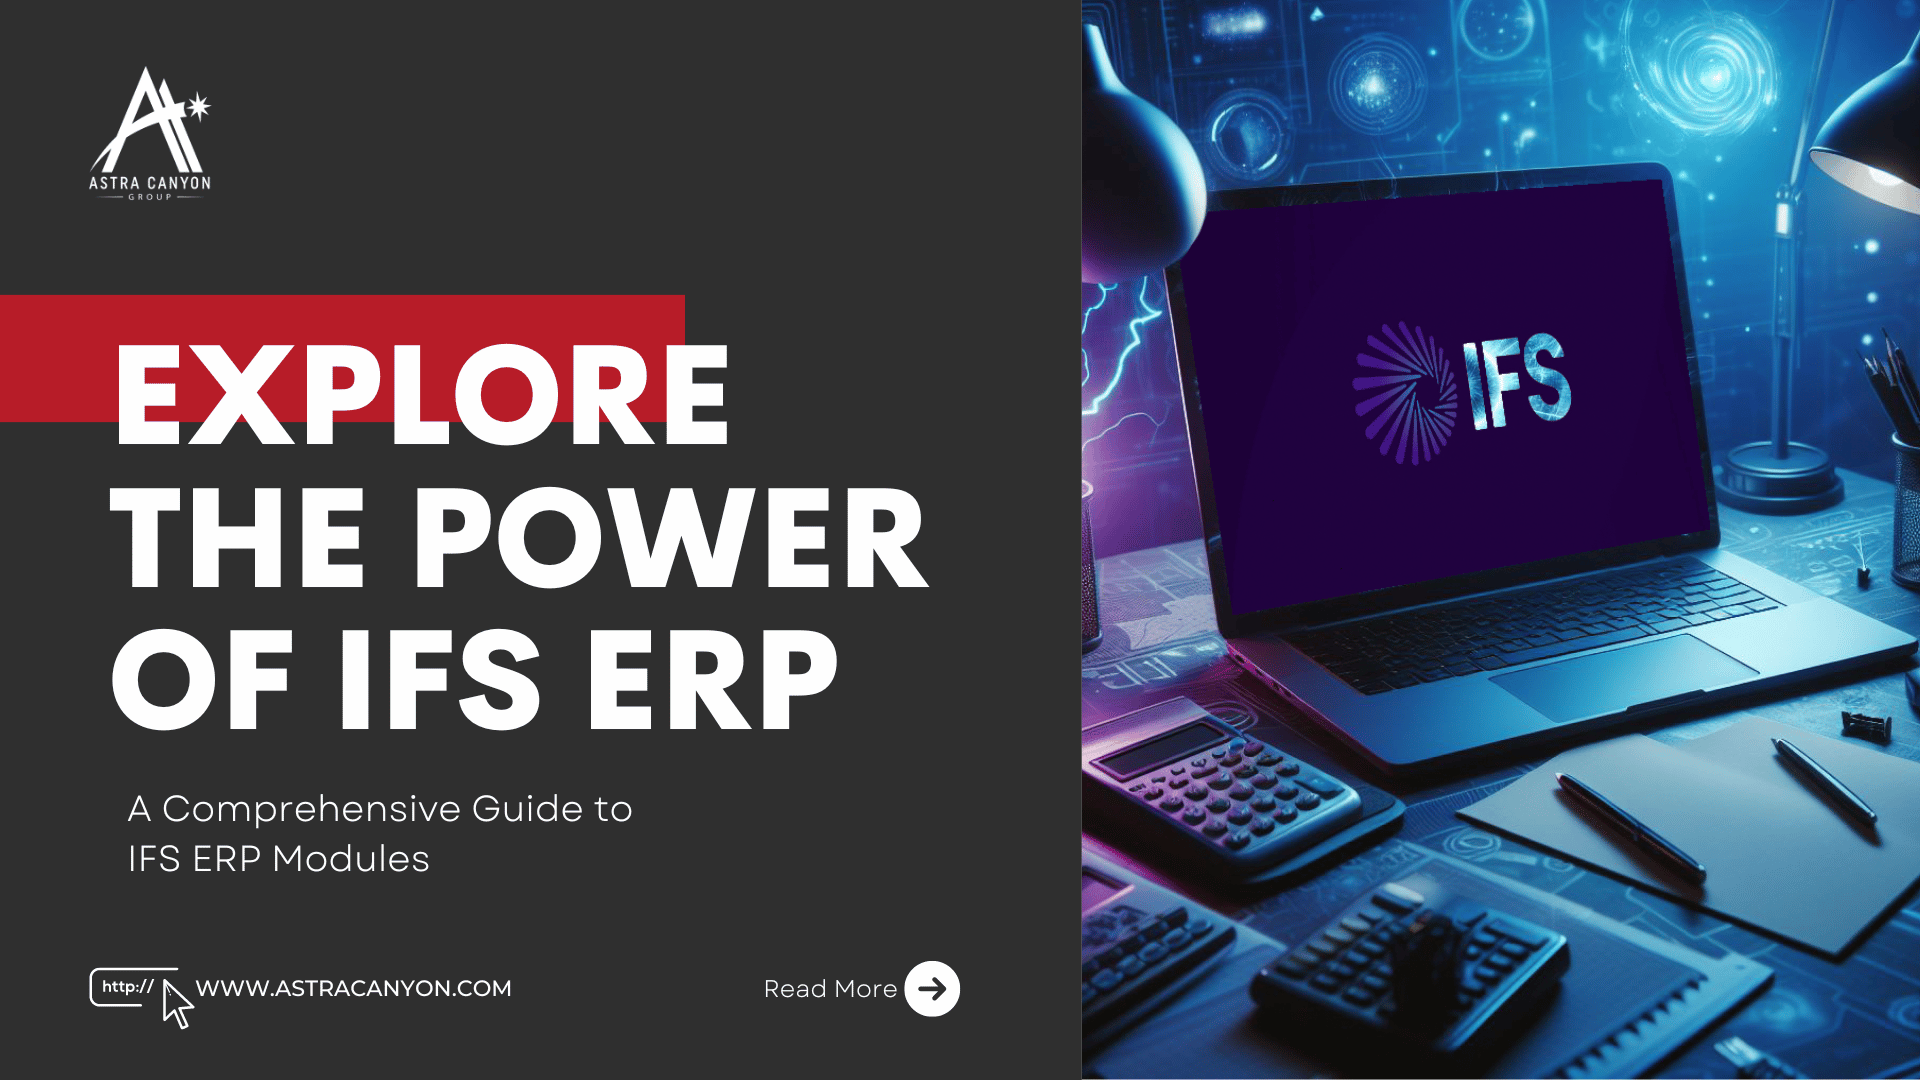 Exploring the Power of IFS ERP: A Comprehensive Guide to IFS ERP Modules